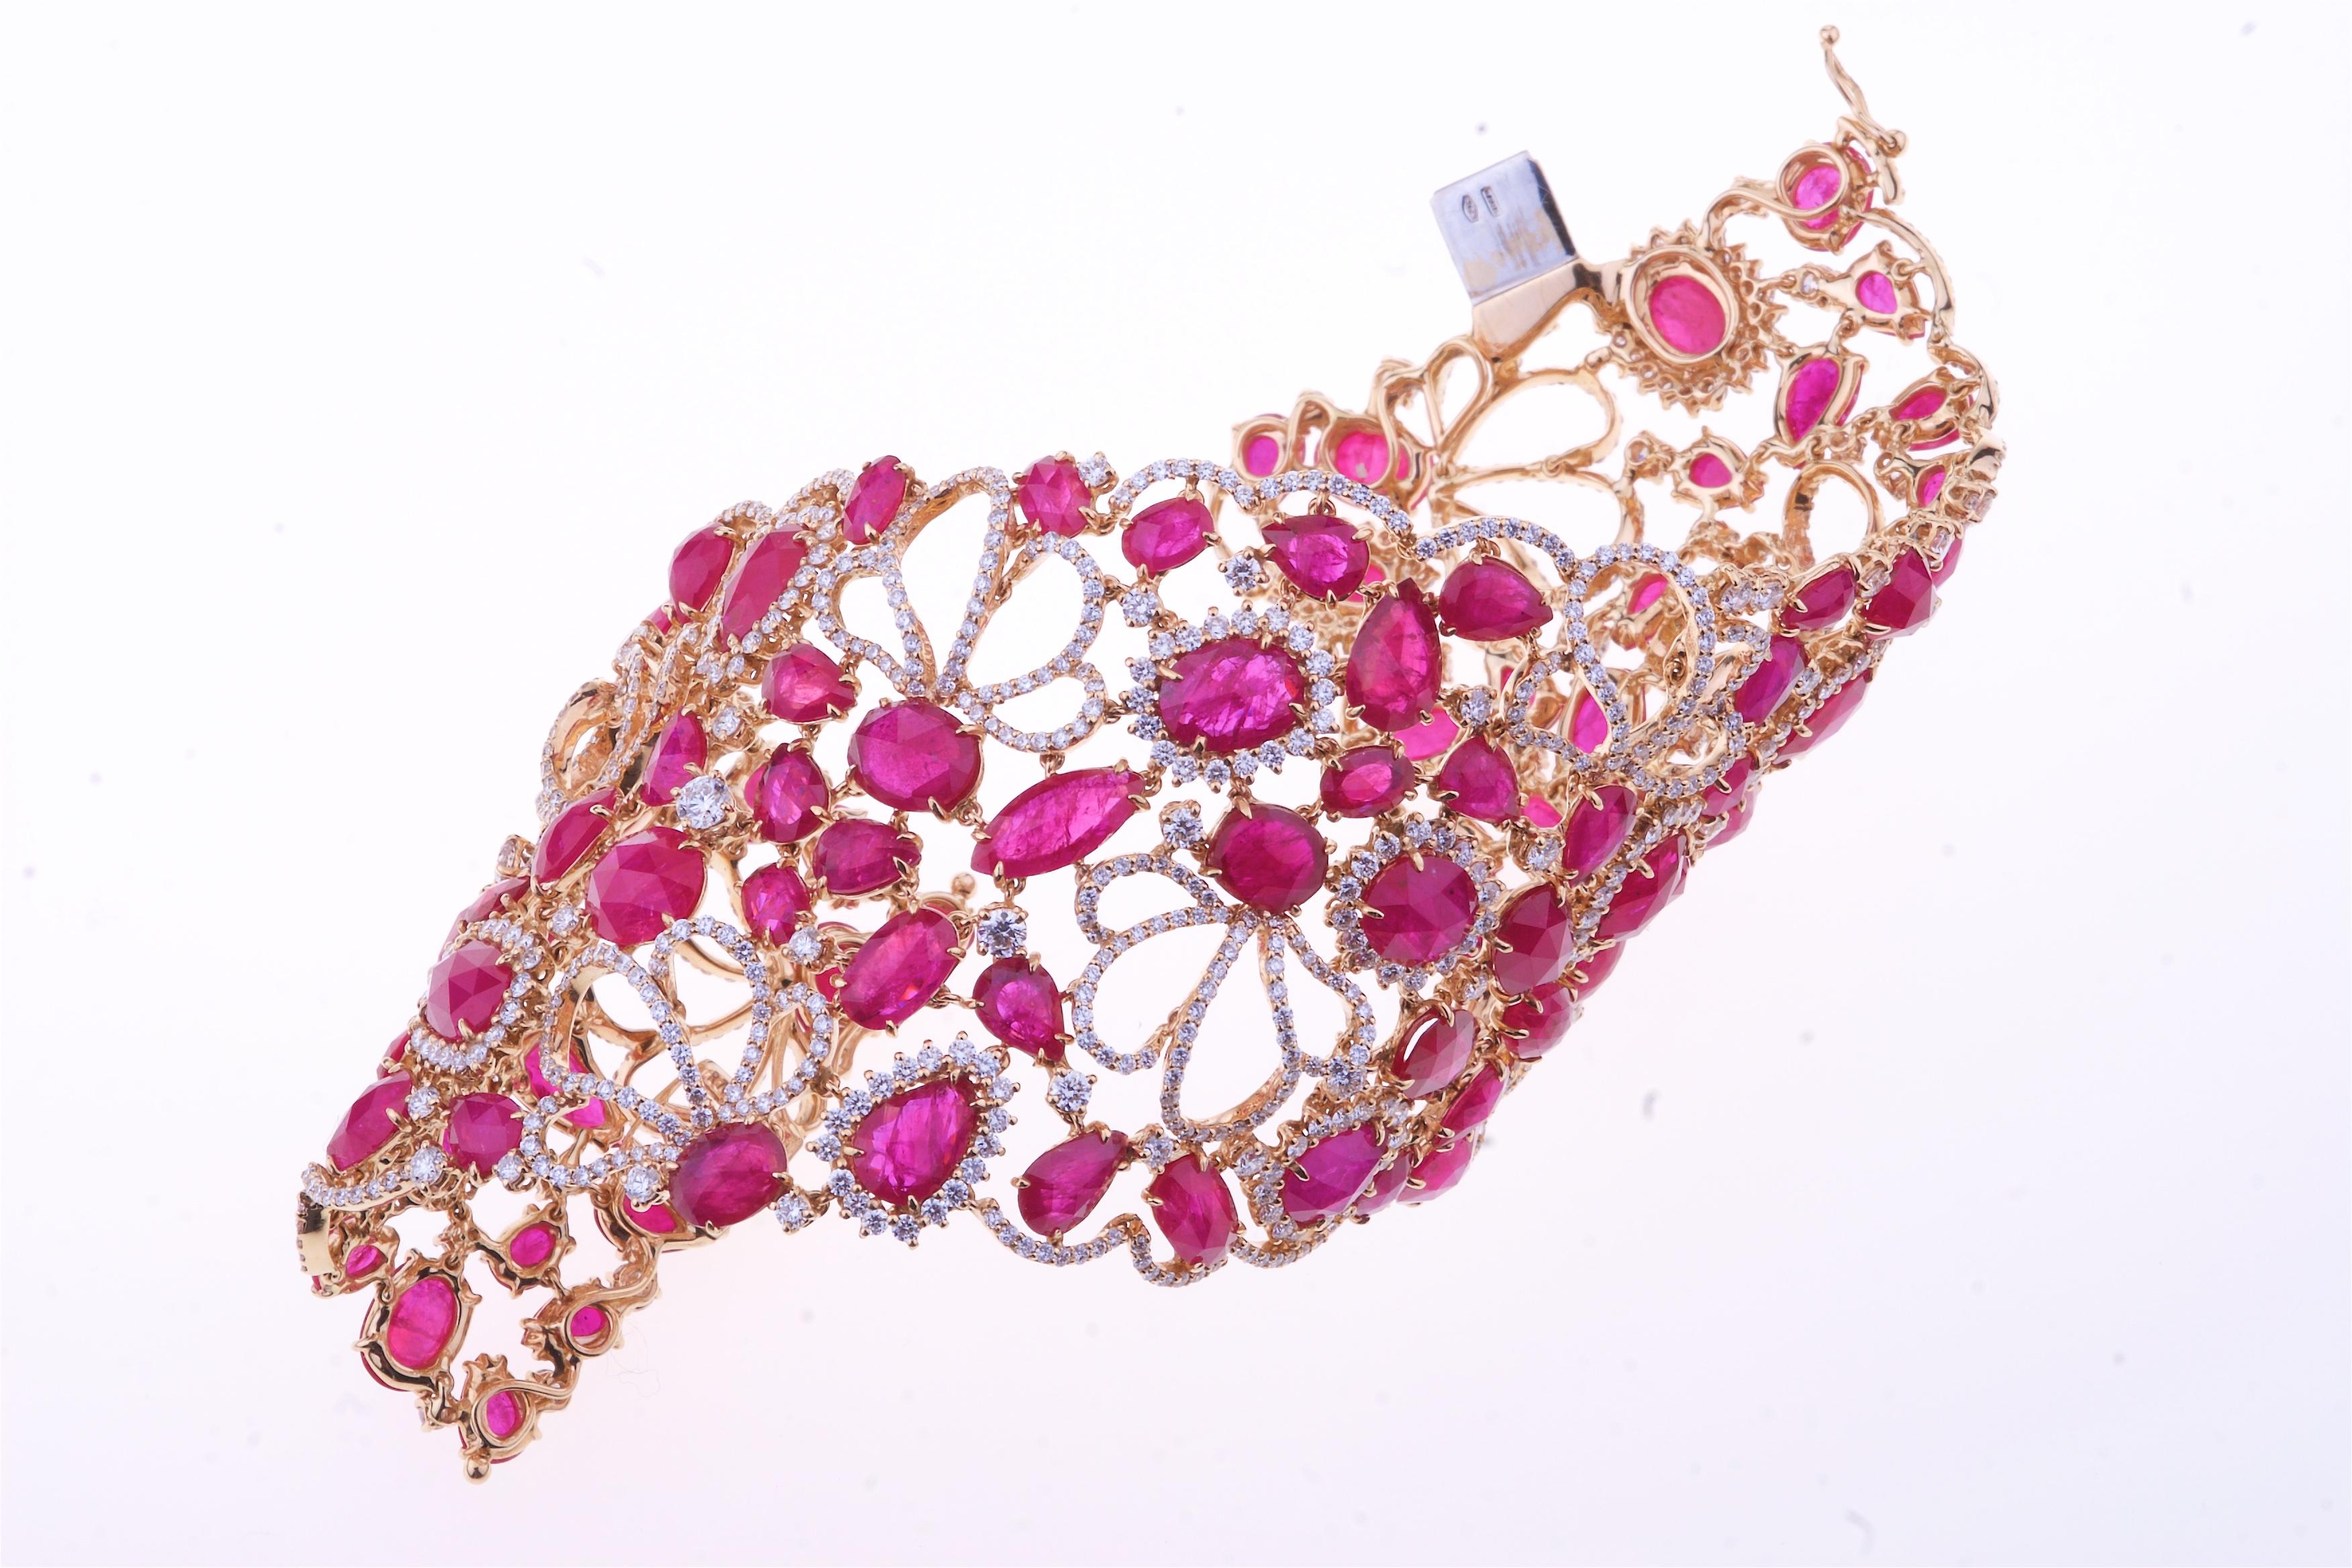 Women's Stunning Band Bracelet with Ruby and Diamonds in a Flowers Design For Sale